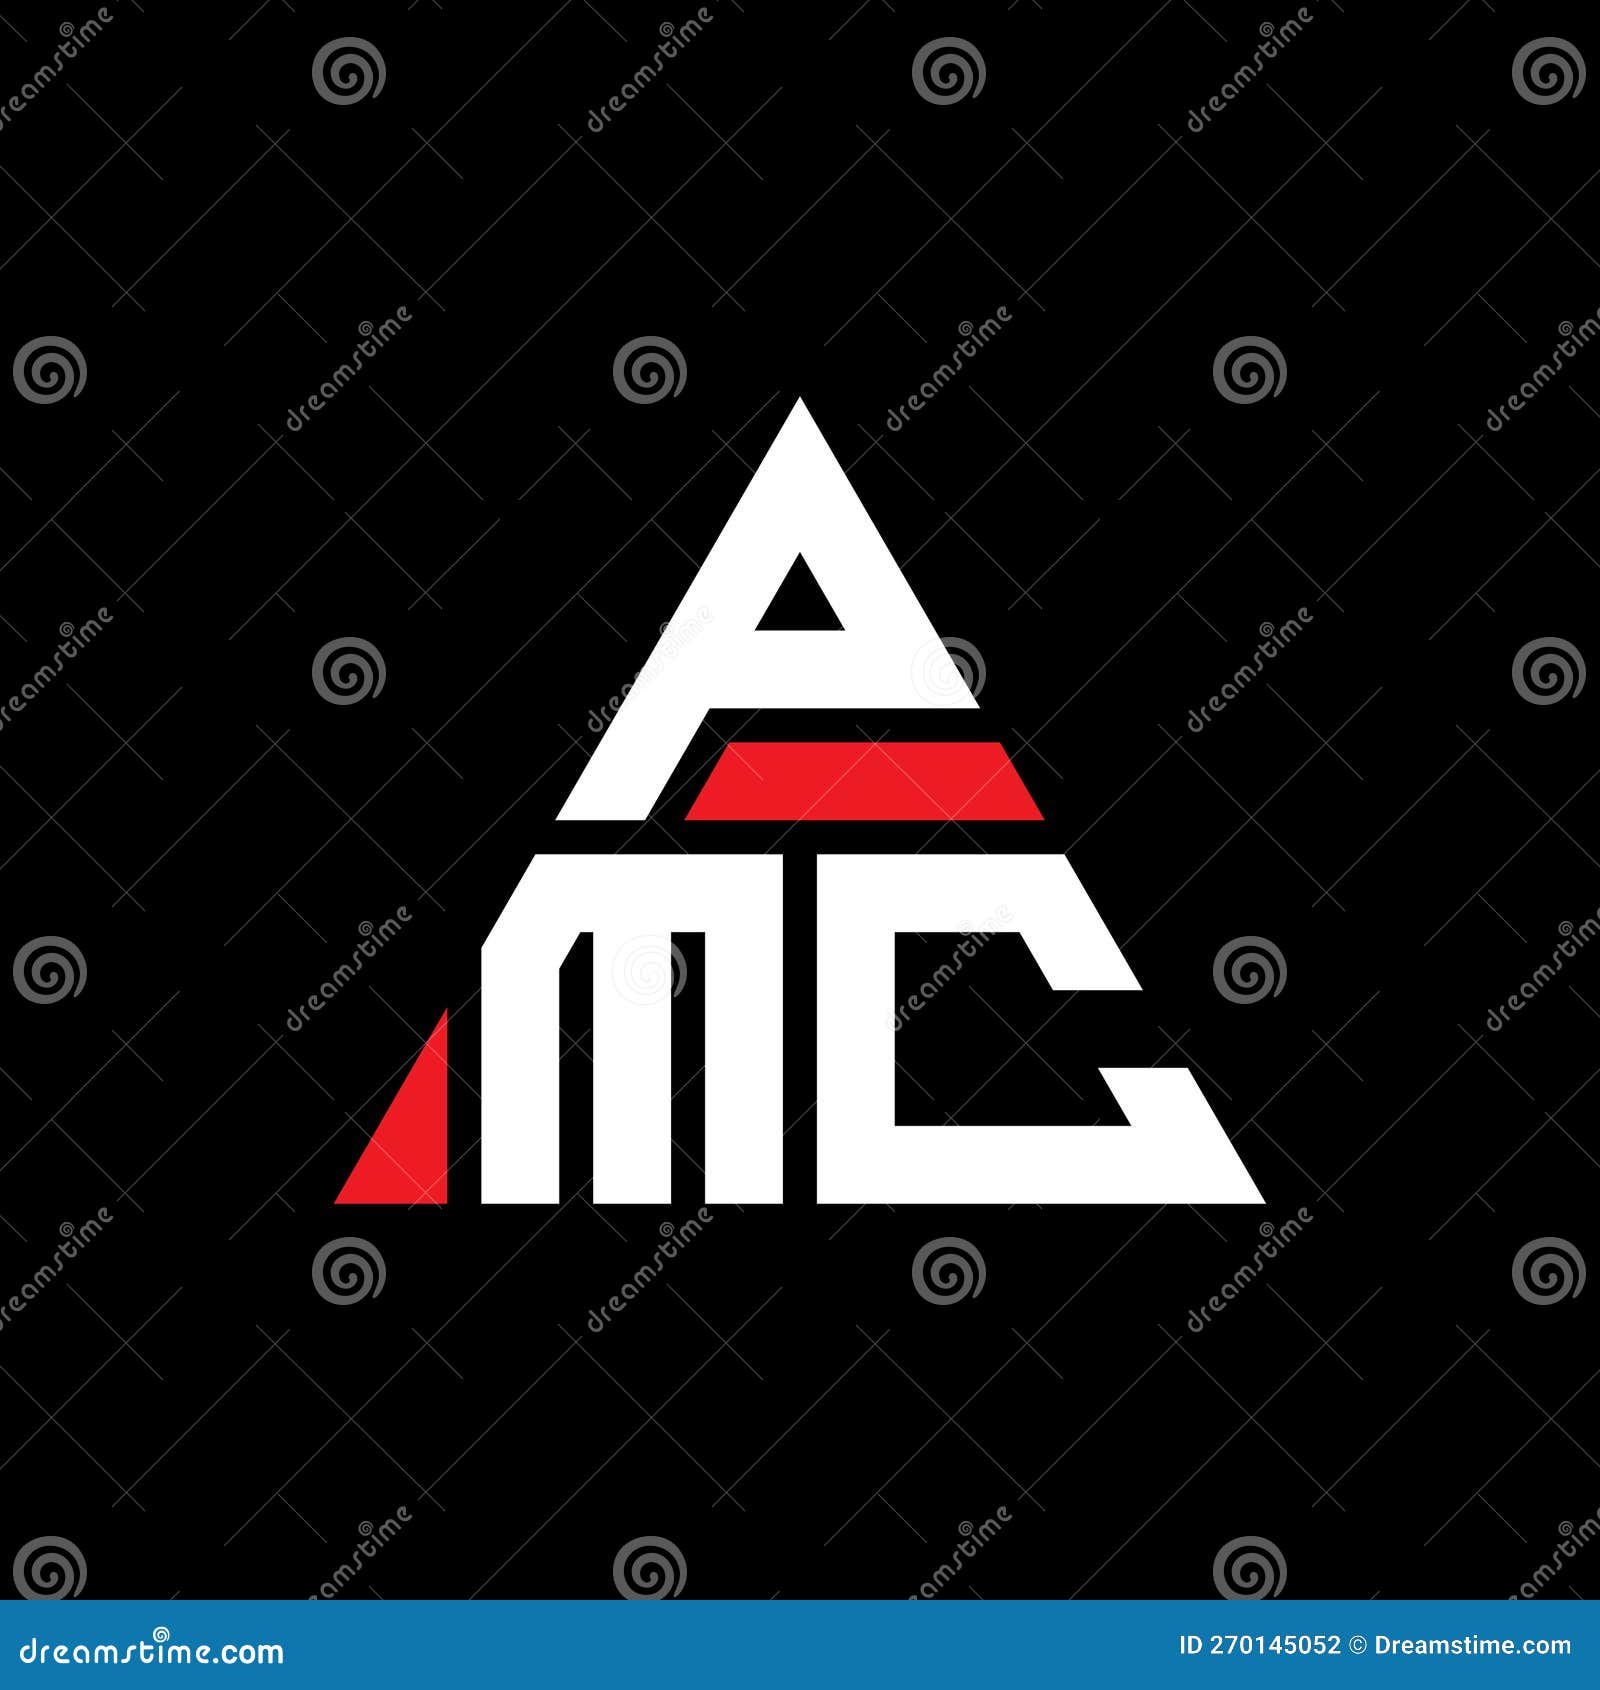 pmc triangle letter logo  with triangle . pmc triangle logo  monogram. pmc triangle  logo template with red